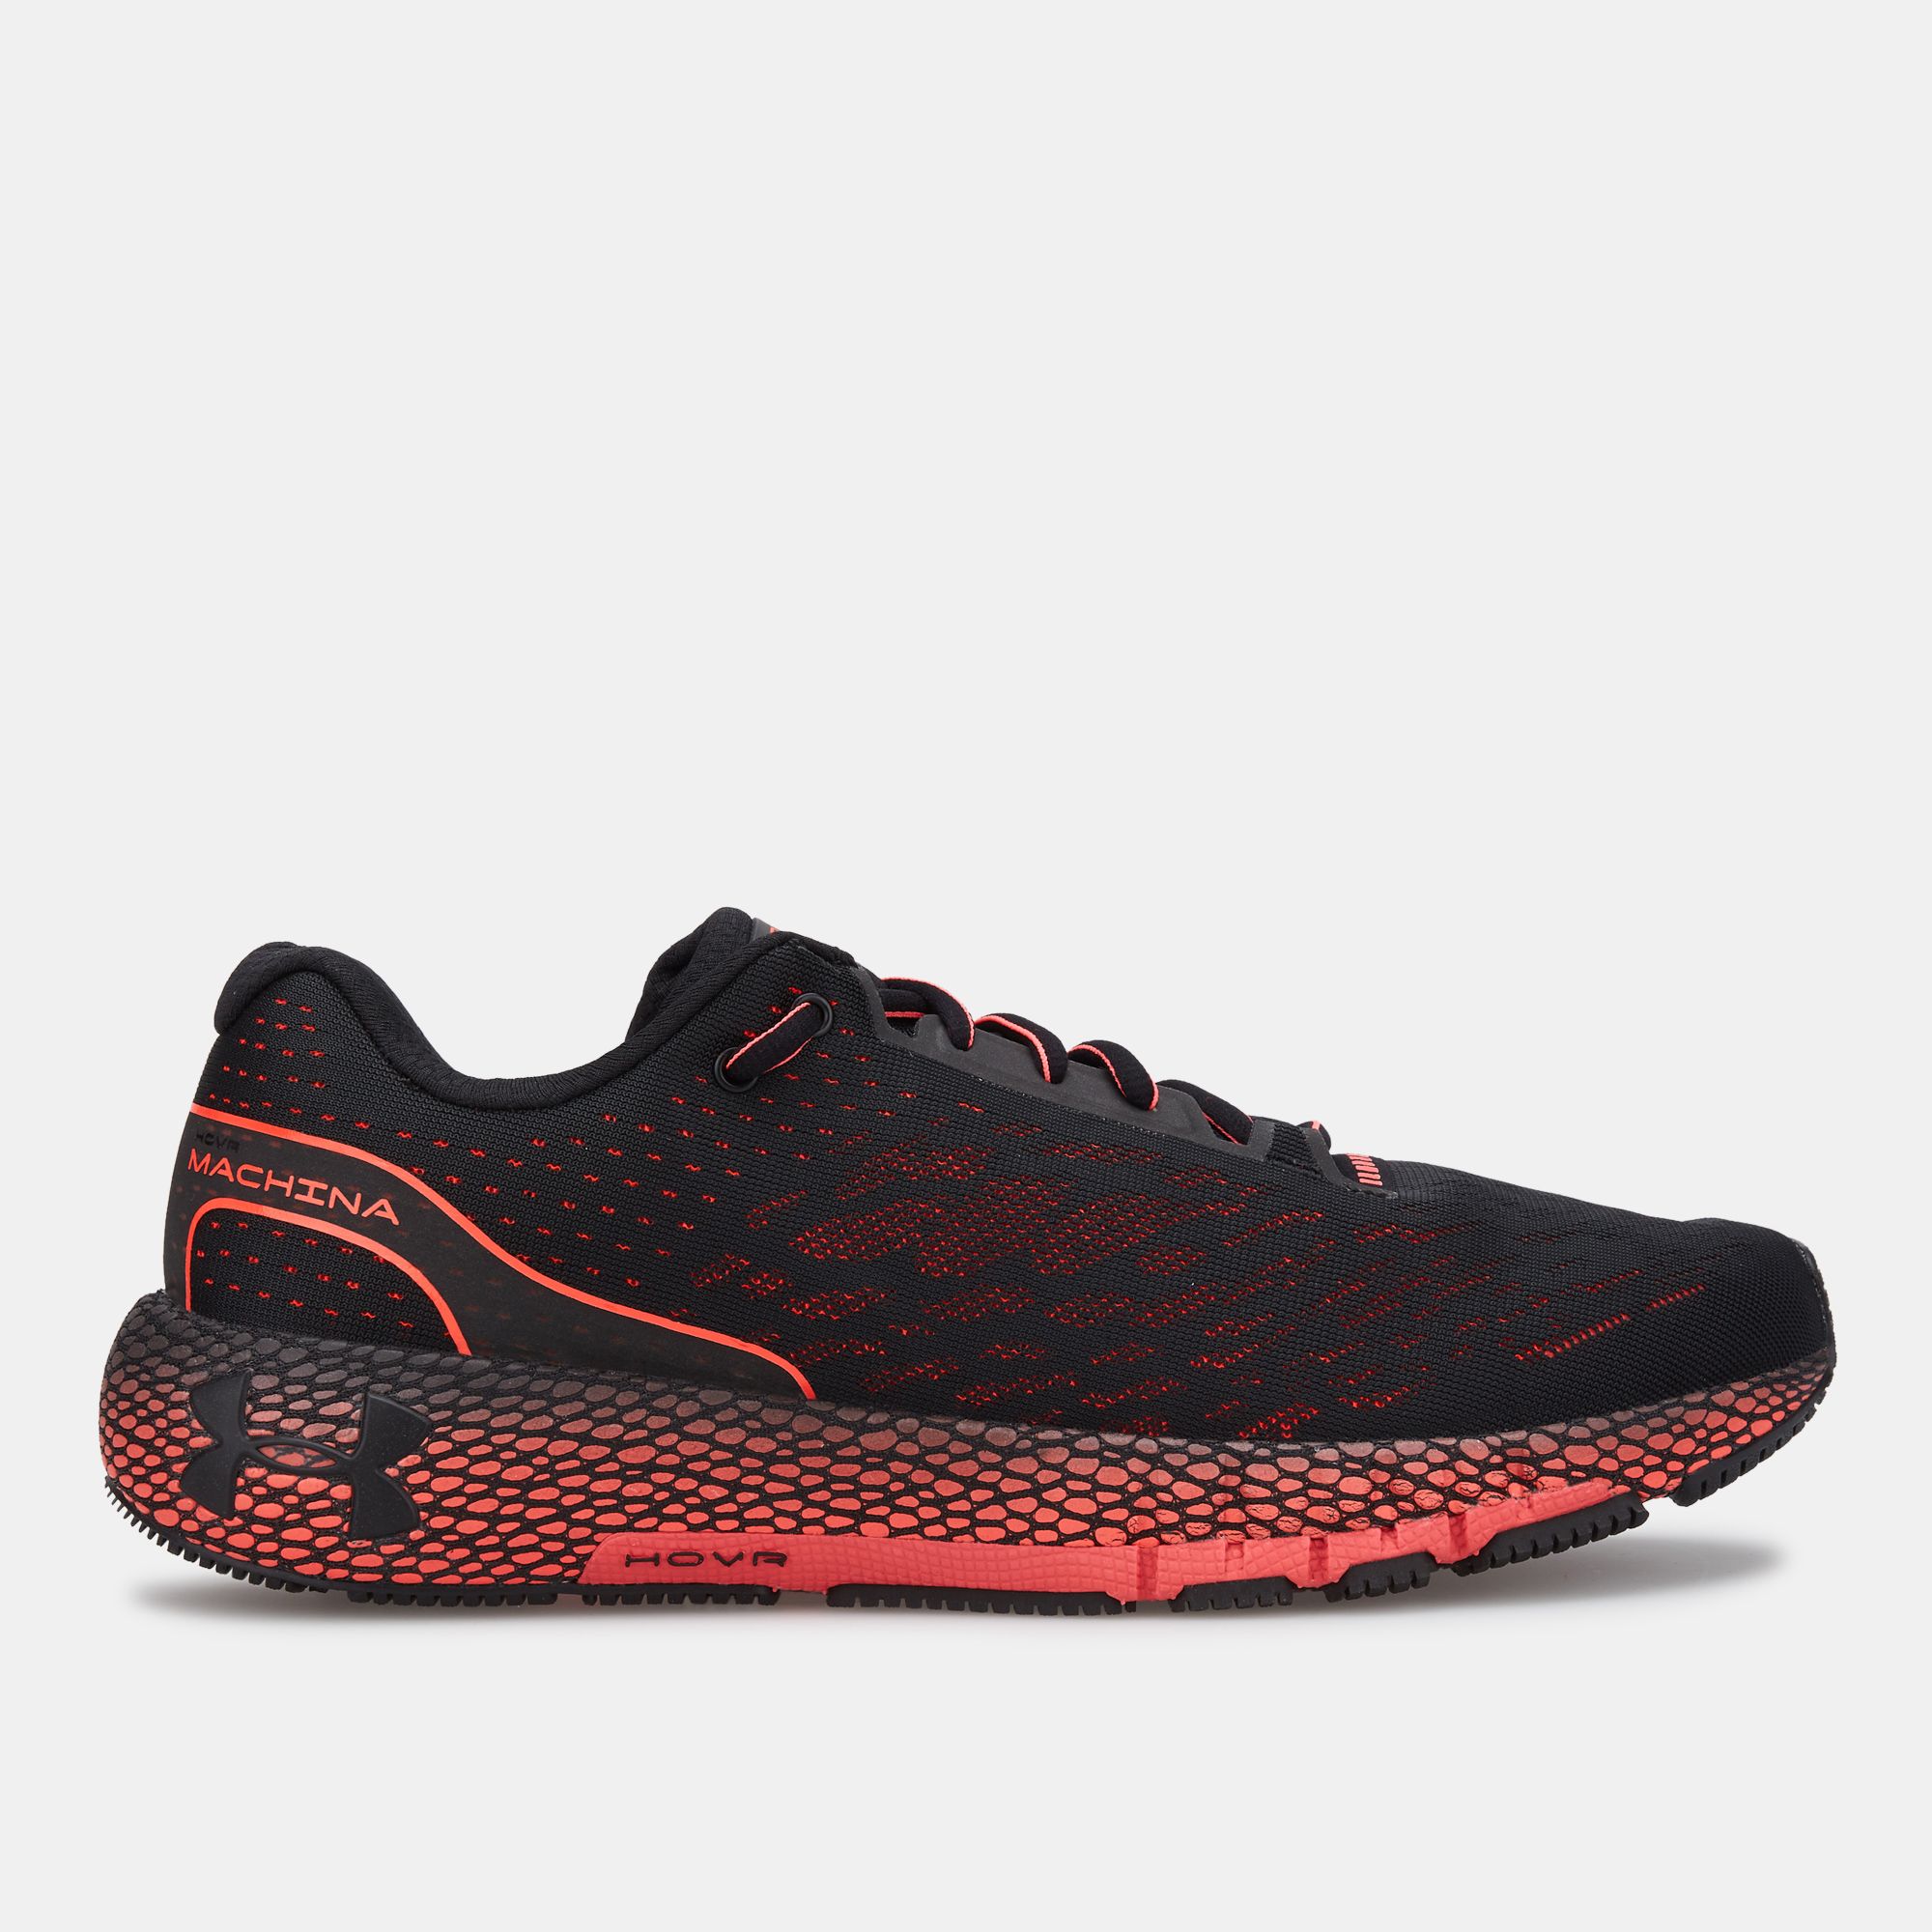 under armour shoes maroon